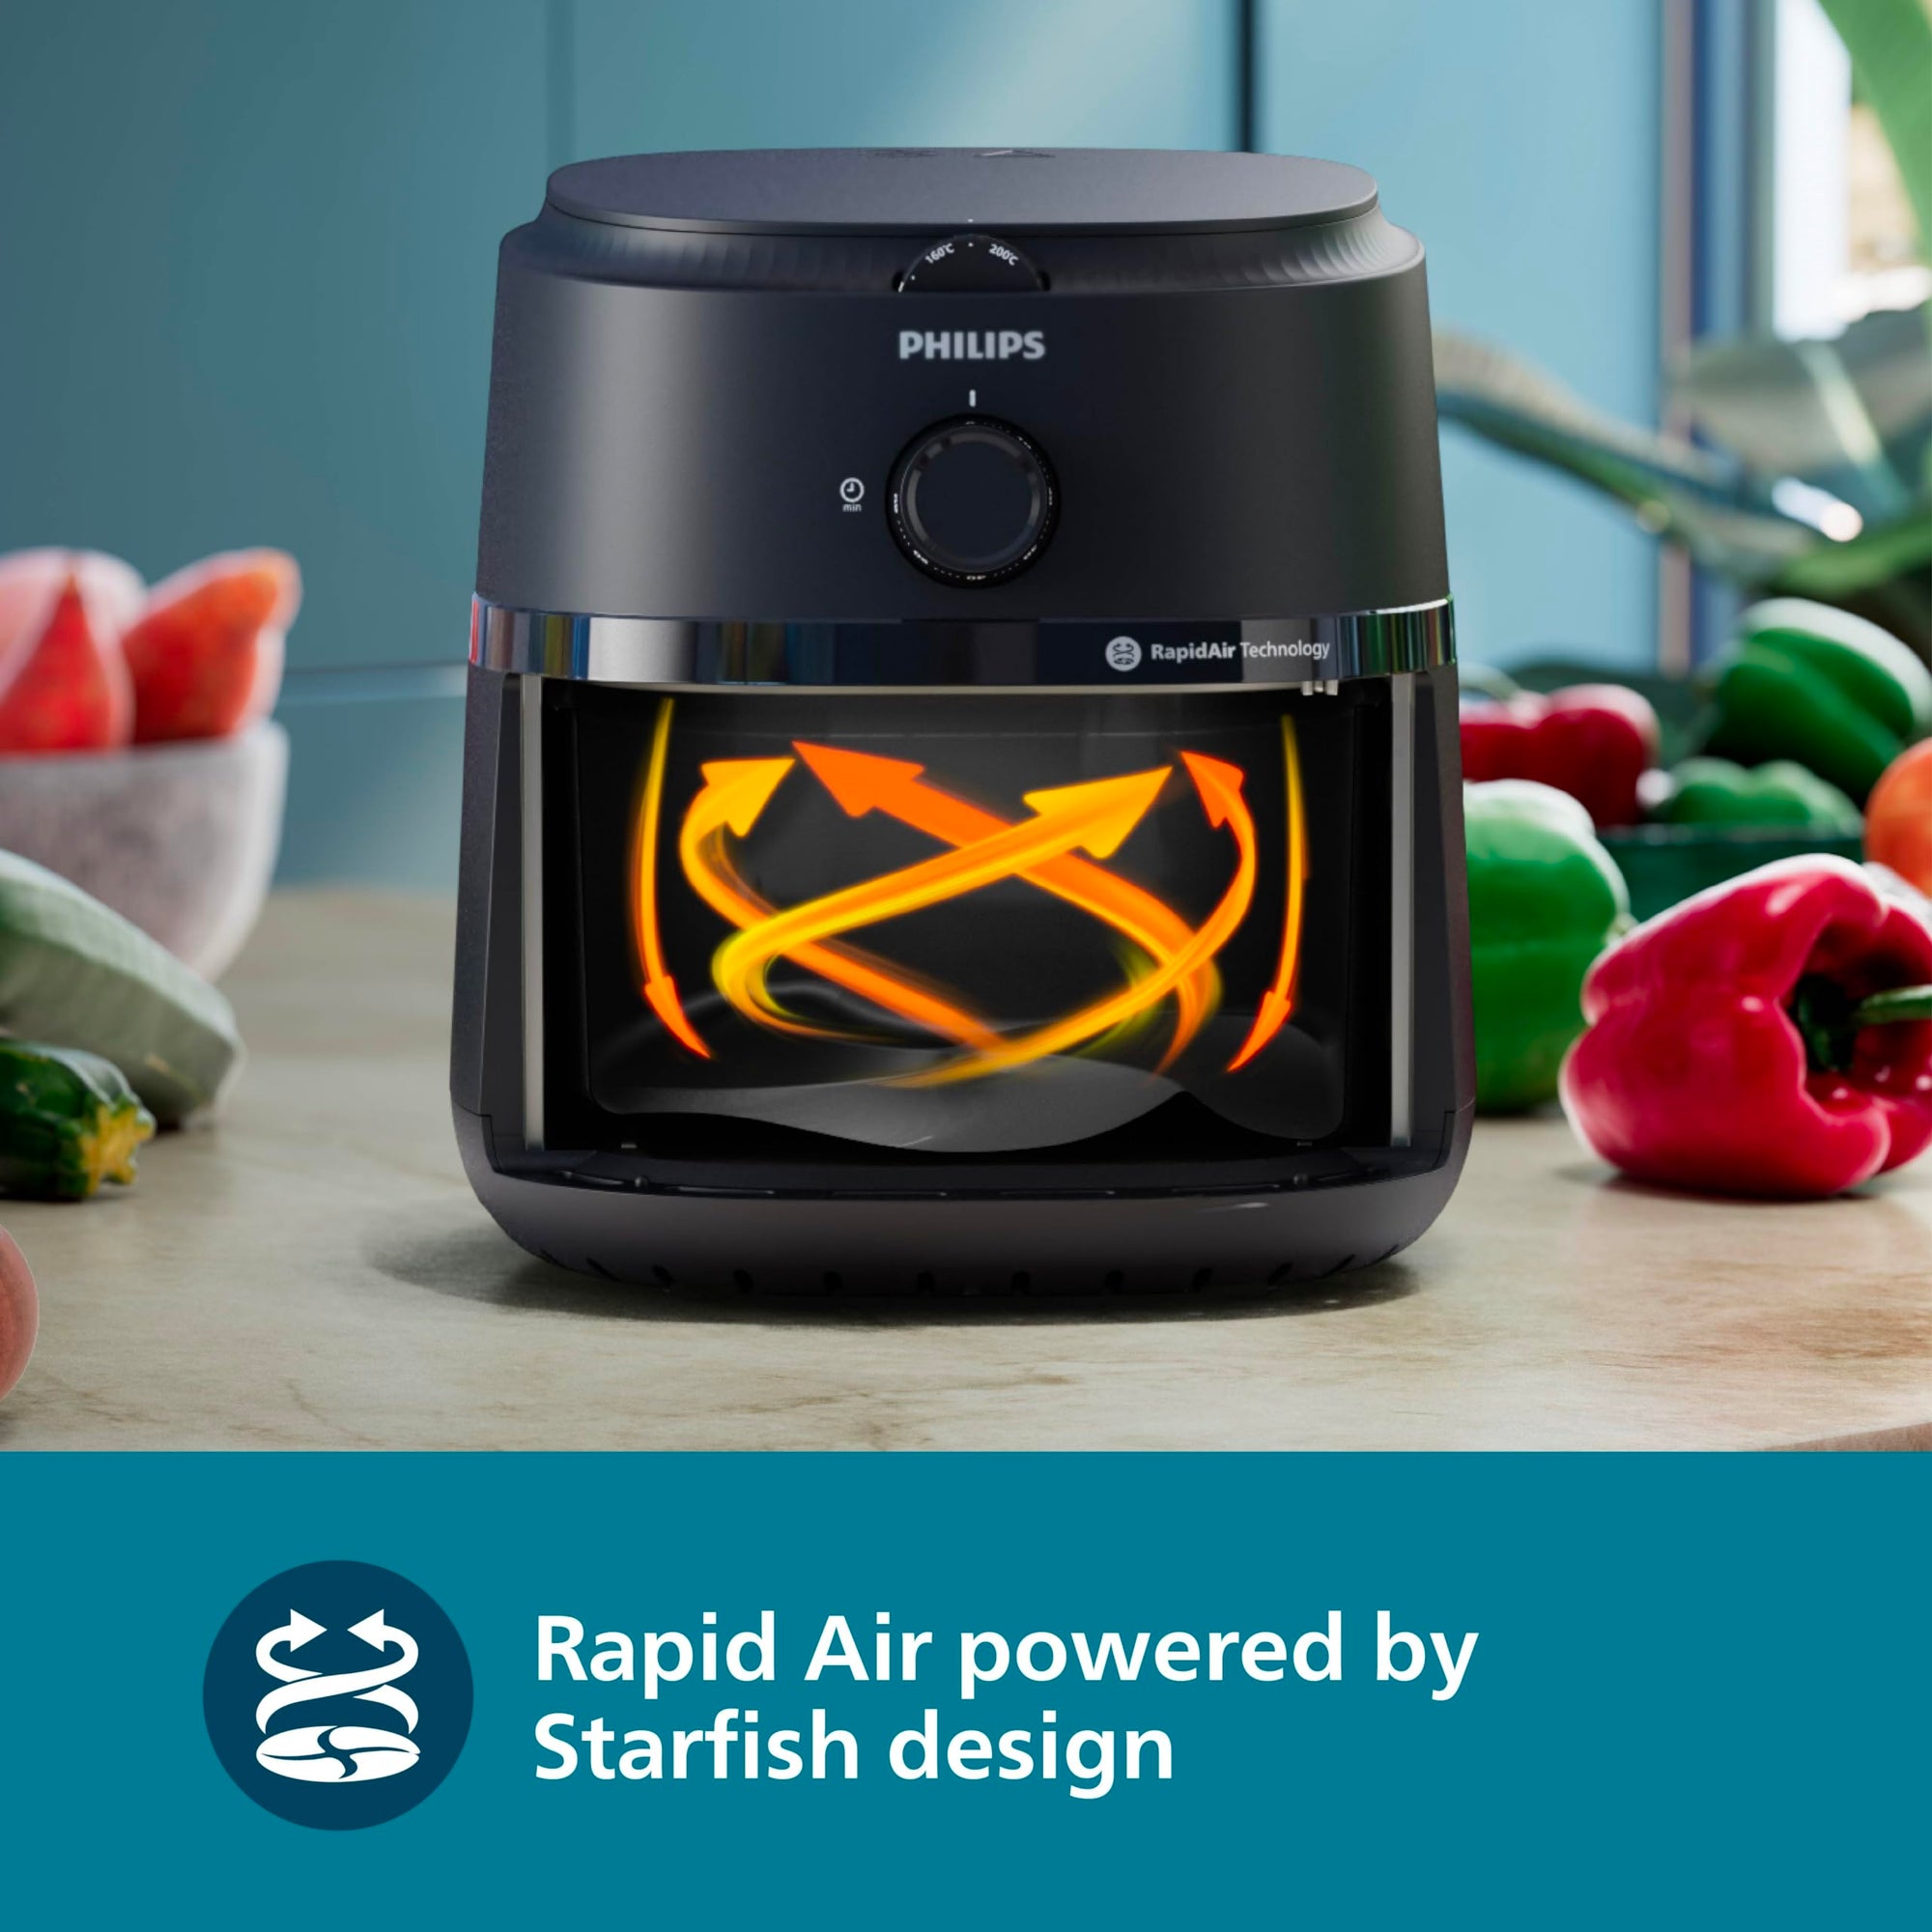 Philips Air Fryer NA120/00 rapid air powered by starfish design